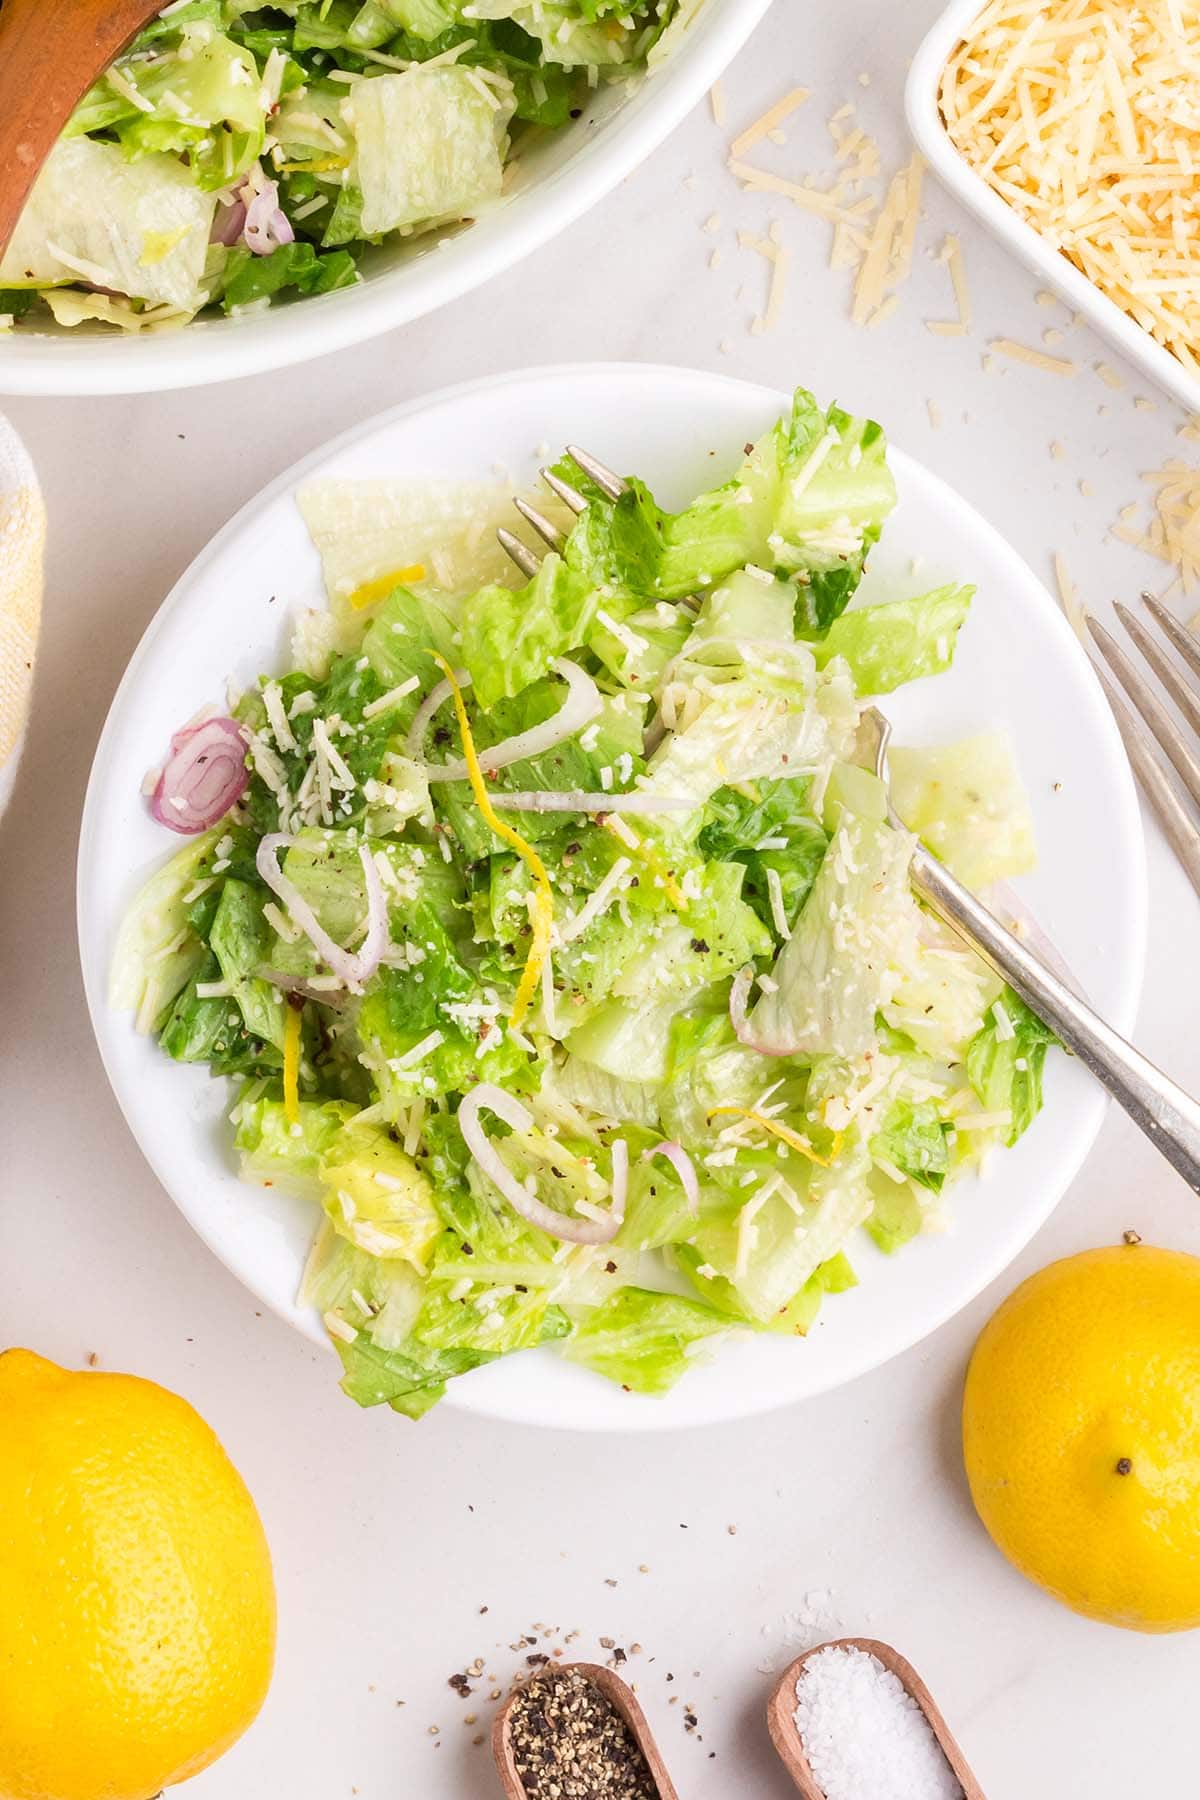 lemon parmesan salad on a plate with a fork on the side and a couple of lemons on the background.